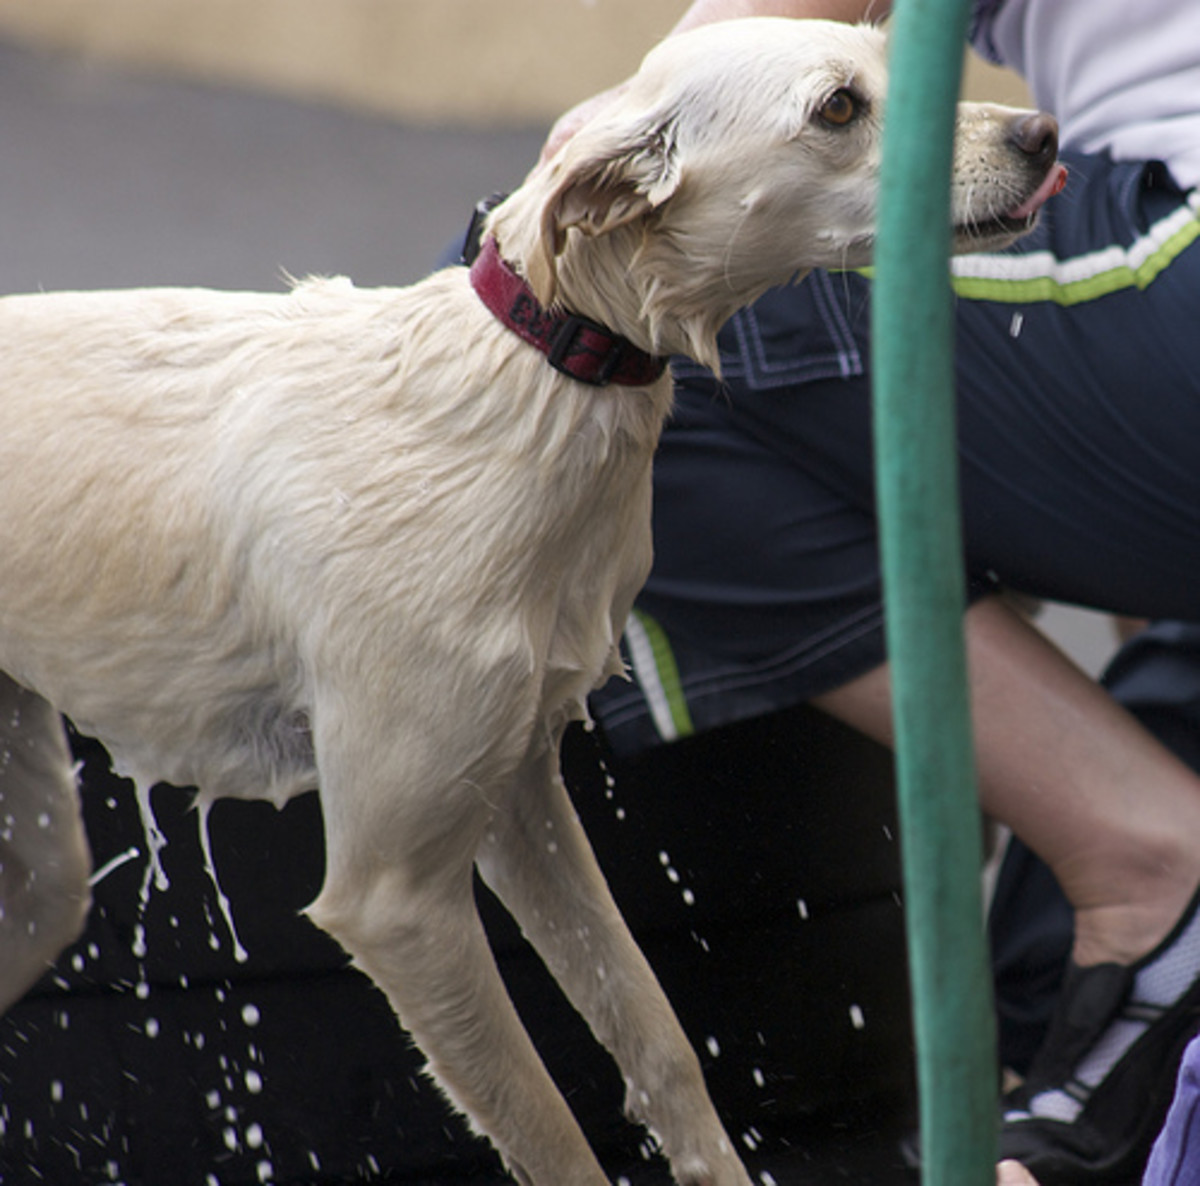 Bathing a dog outside with a hose can be a good option in certain circumstances.